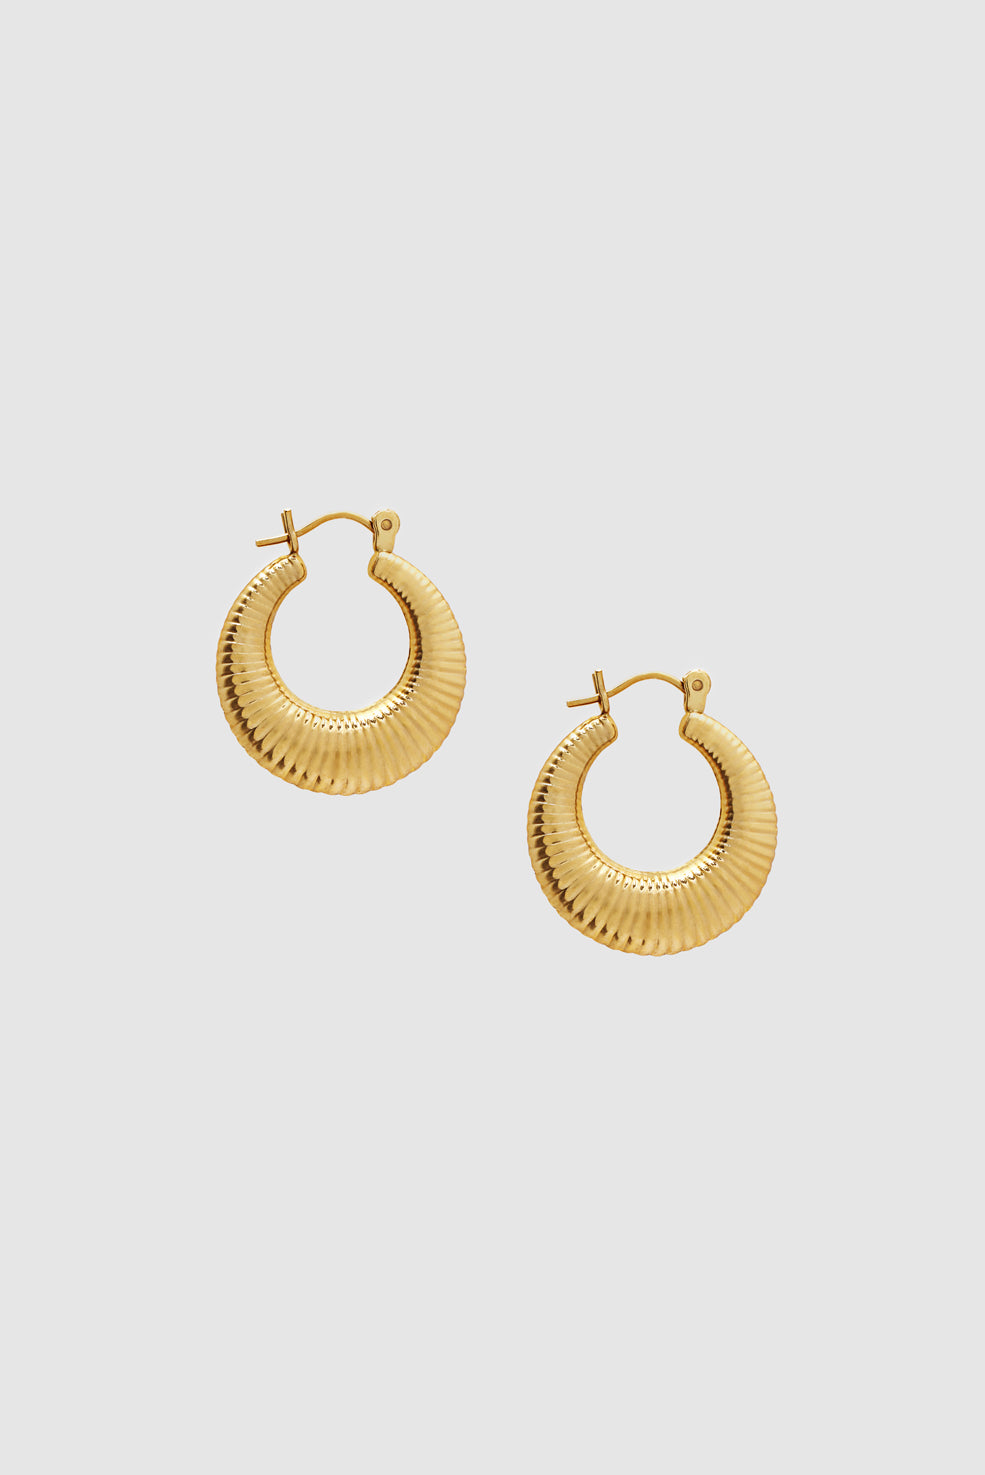 ANINE BING Chunky Coil Hoop Earrings - 14k Gold - Front View